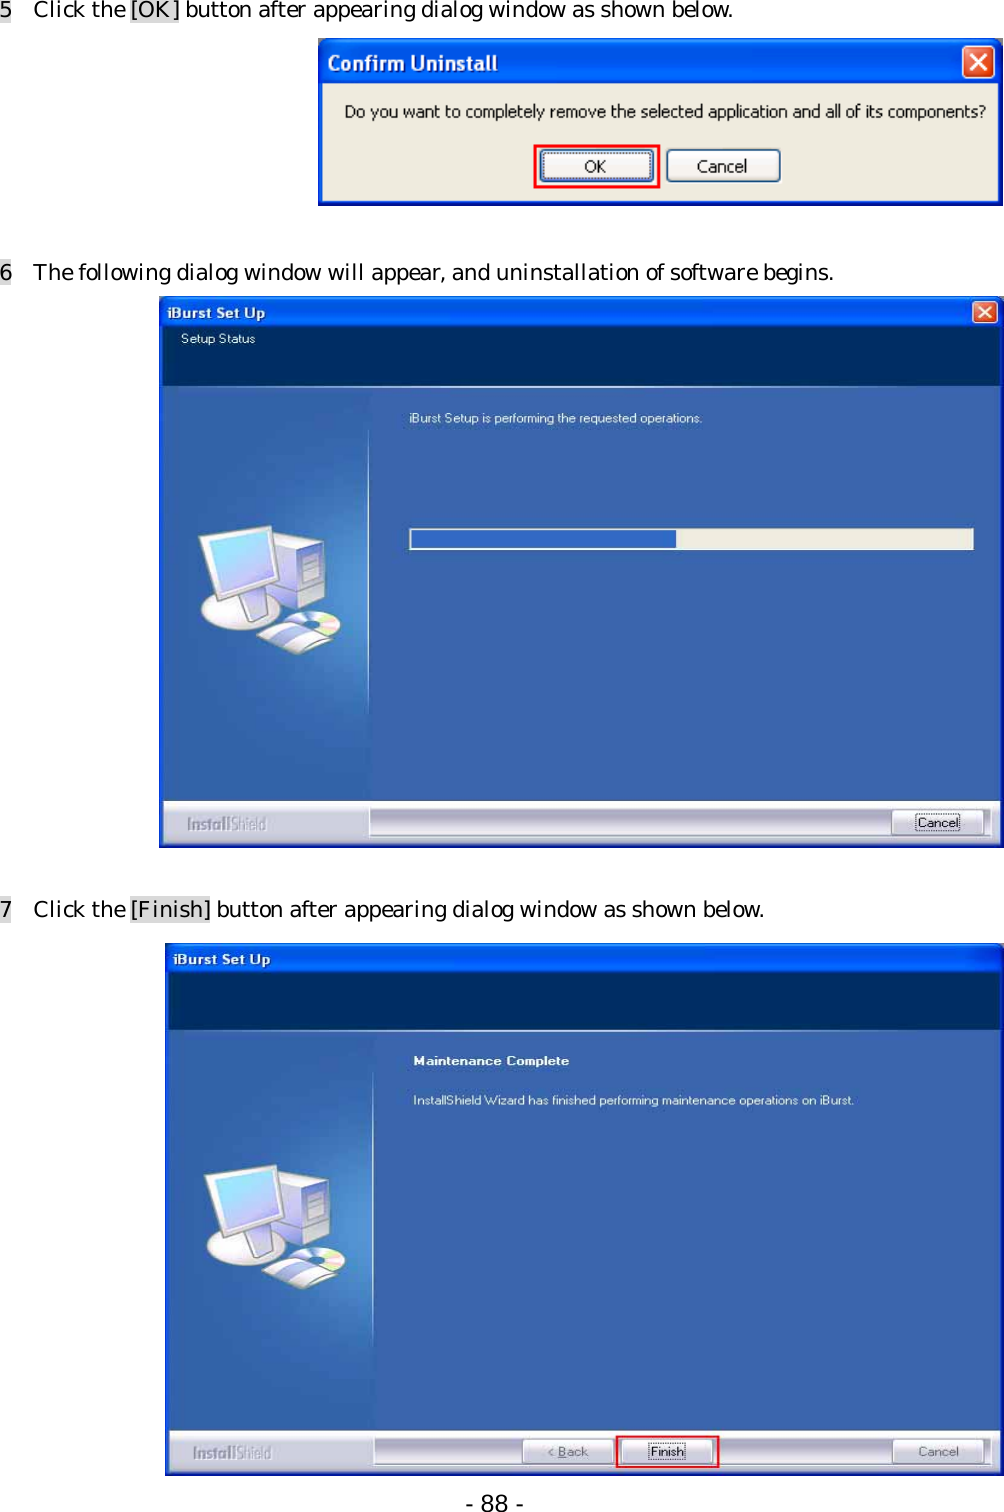 5    Click the [OK] button after appearing dialog window as shown below.   6    The following dialog window will appear, and uninstallation of software begins.   7    Click the [Finish] button after appearing dialog window as shown below.  - 88 -  